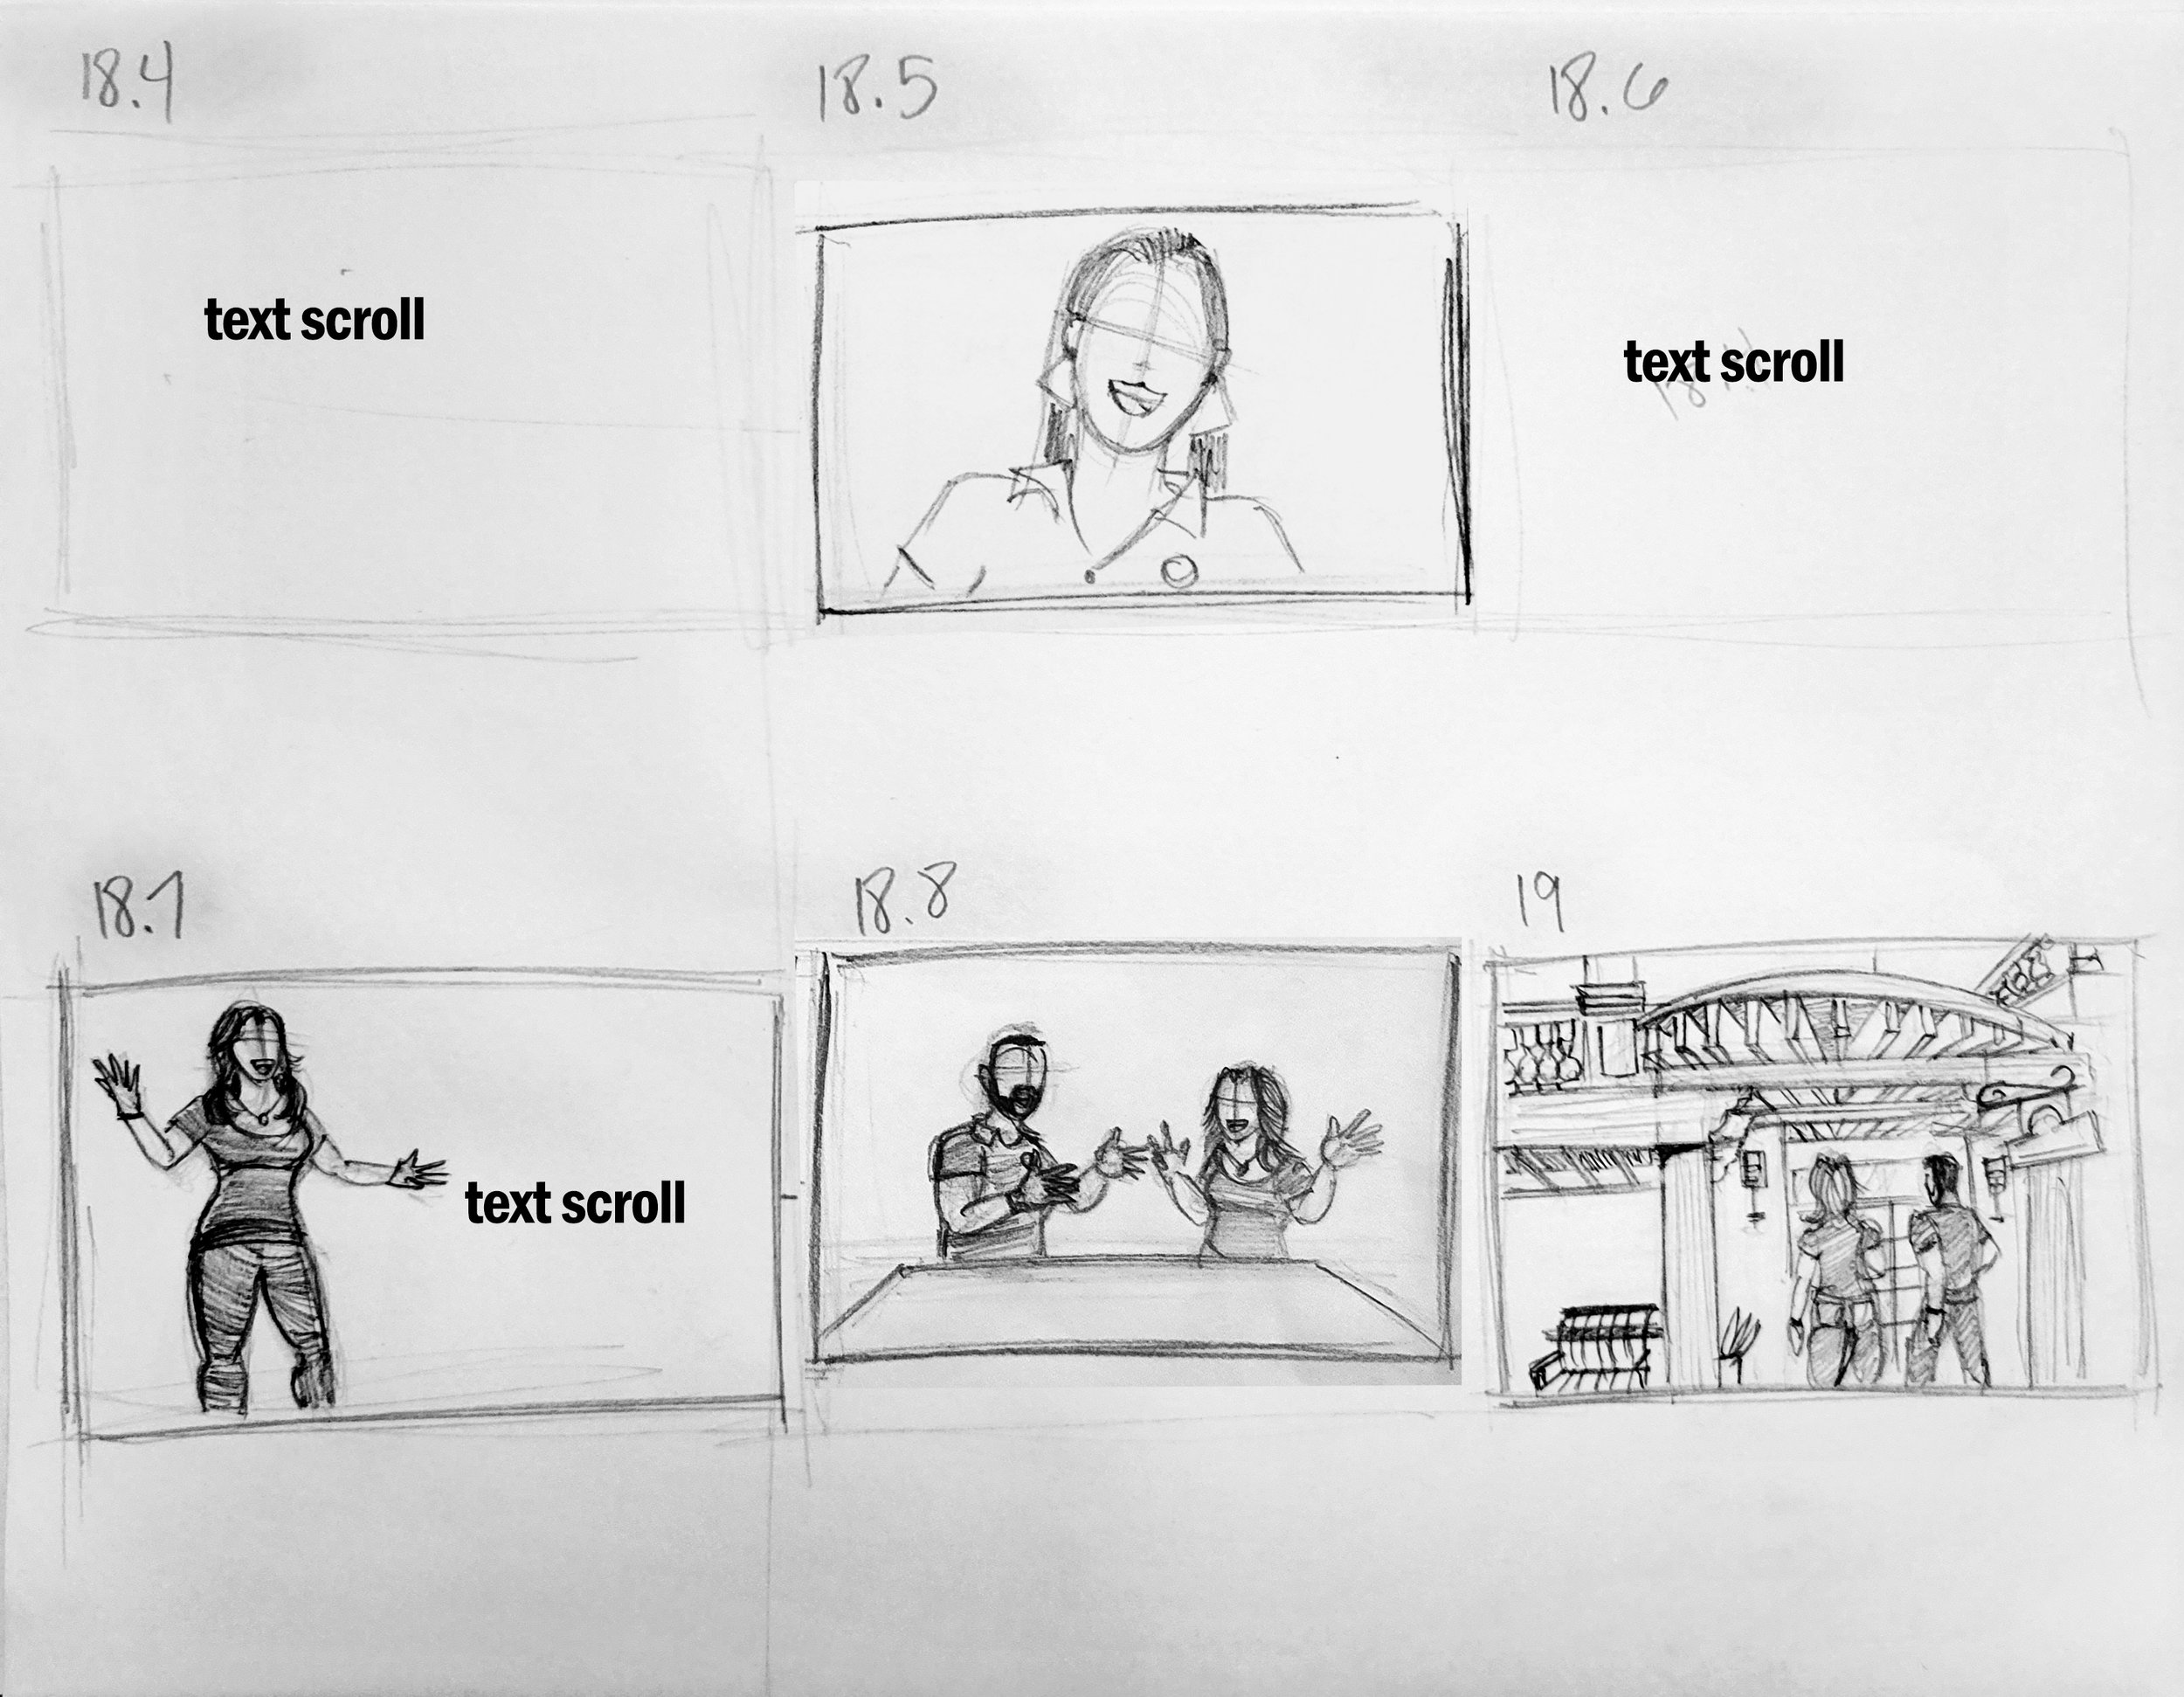 WR_Real_Suite_Eats_S1_E2_StoryBoard_Frames_18_4_to_19.jpg